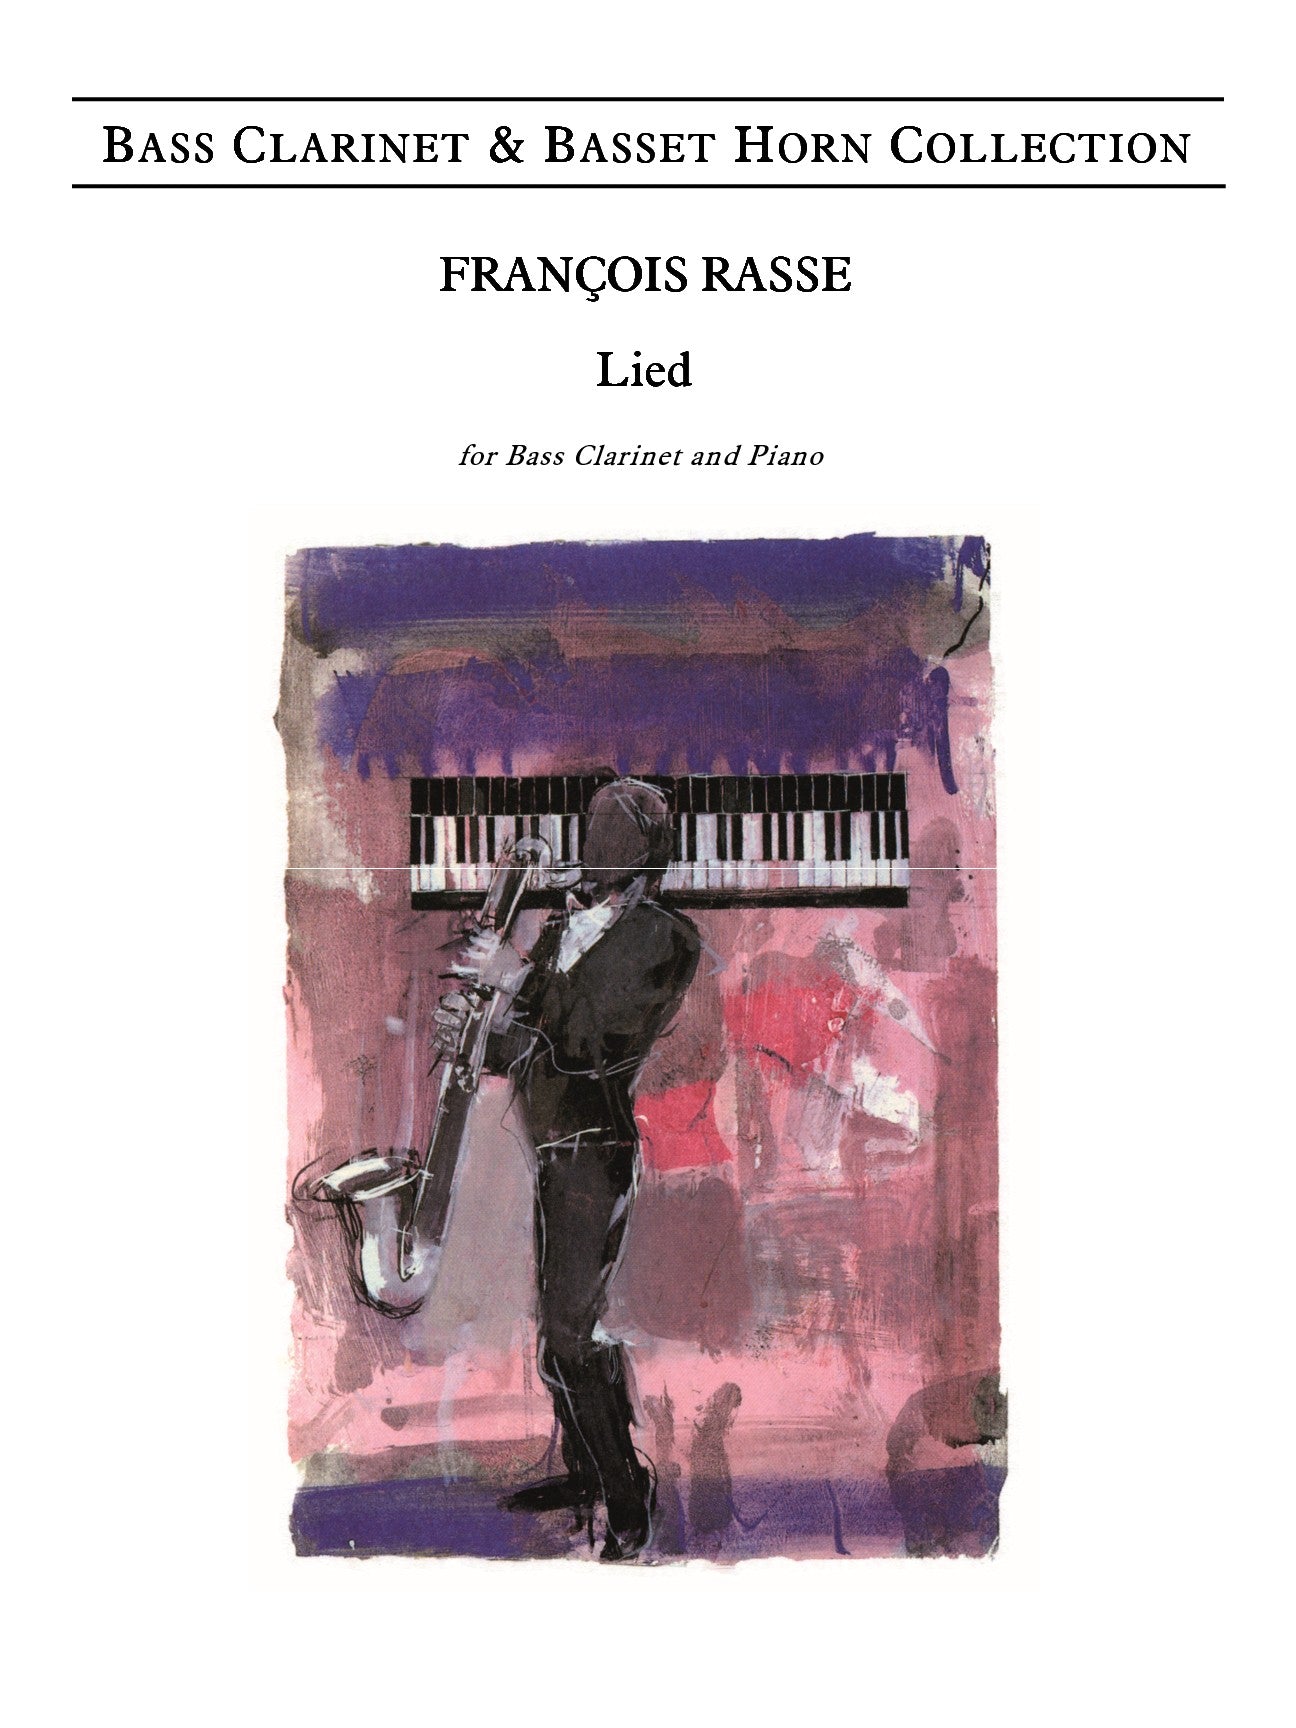 Rasse - Lied for Bass Clarinet and Piano